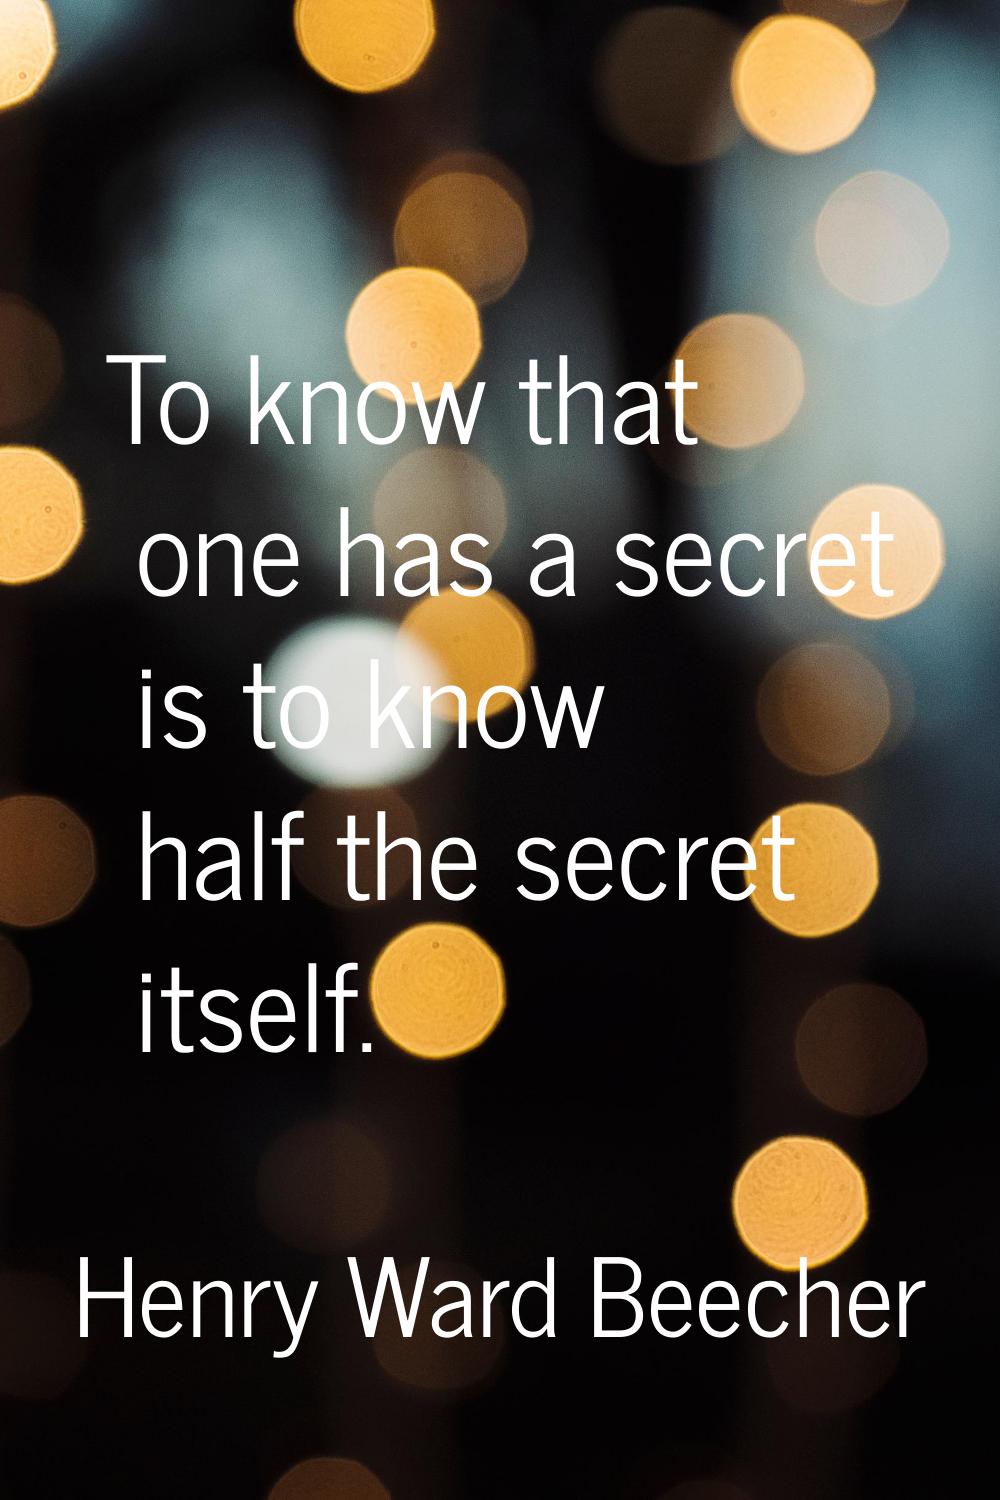 To know that one has a secret is to know half the secret itself.